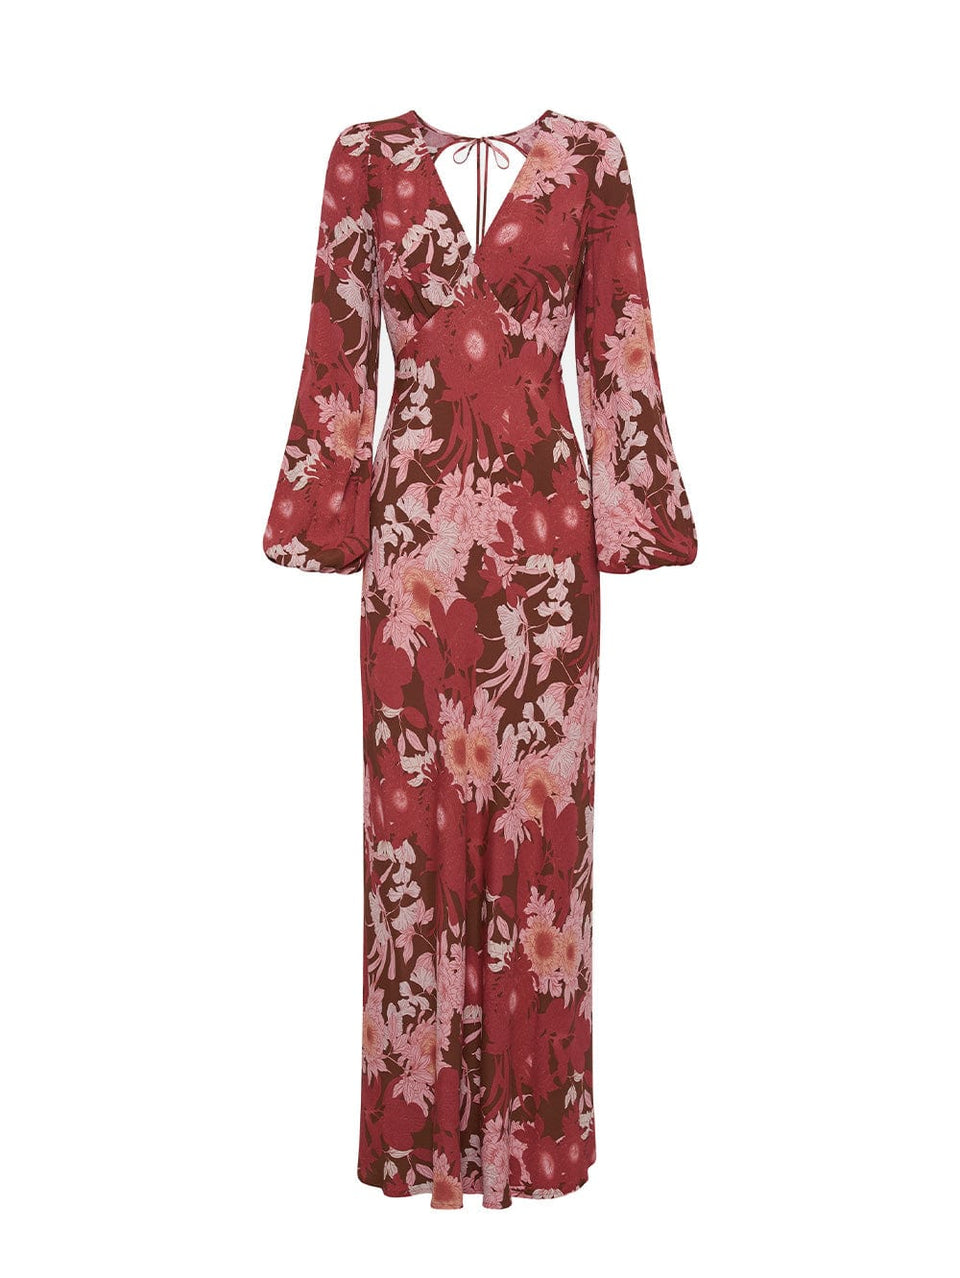 Ghost image of KIVARI Hacienda Tie Back Maxi Dress: A red, pink and brown floral dress crafted from sustainable LENZING Viscose Crepe in a bias cut with underbust seams, long sleeves and cut-out back with keyhole ties.